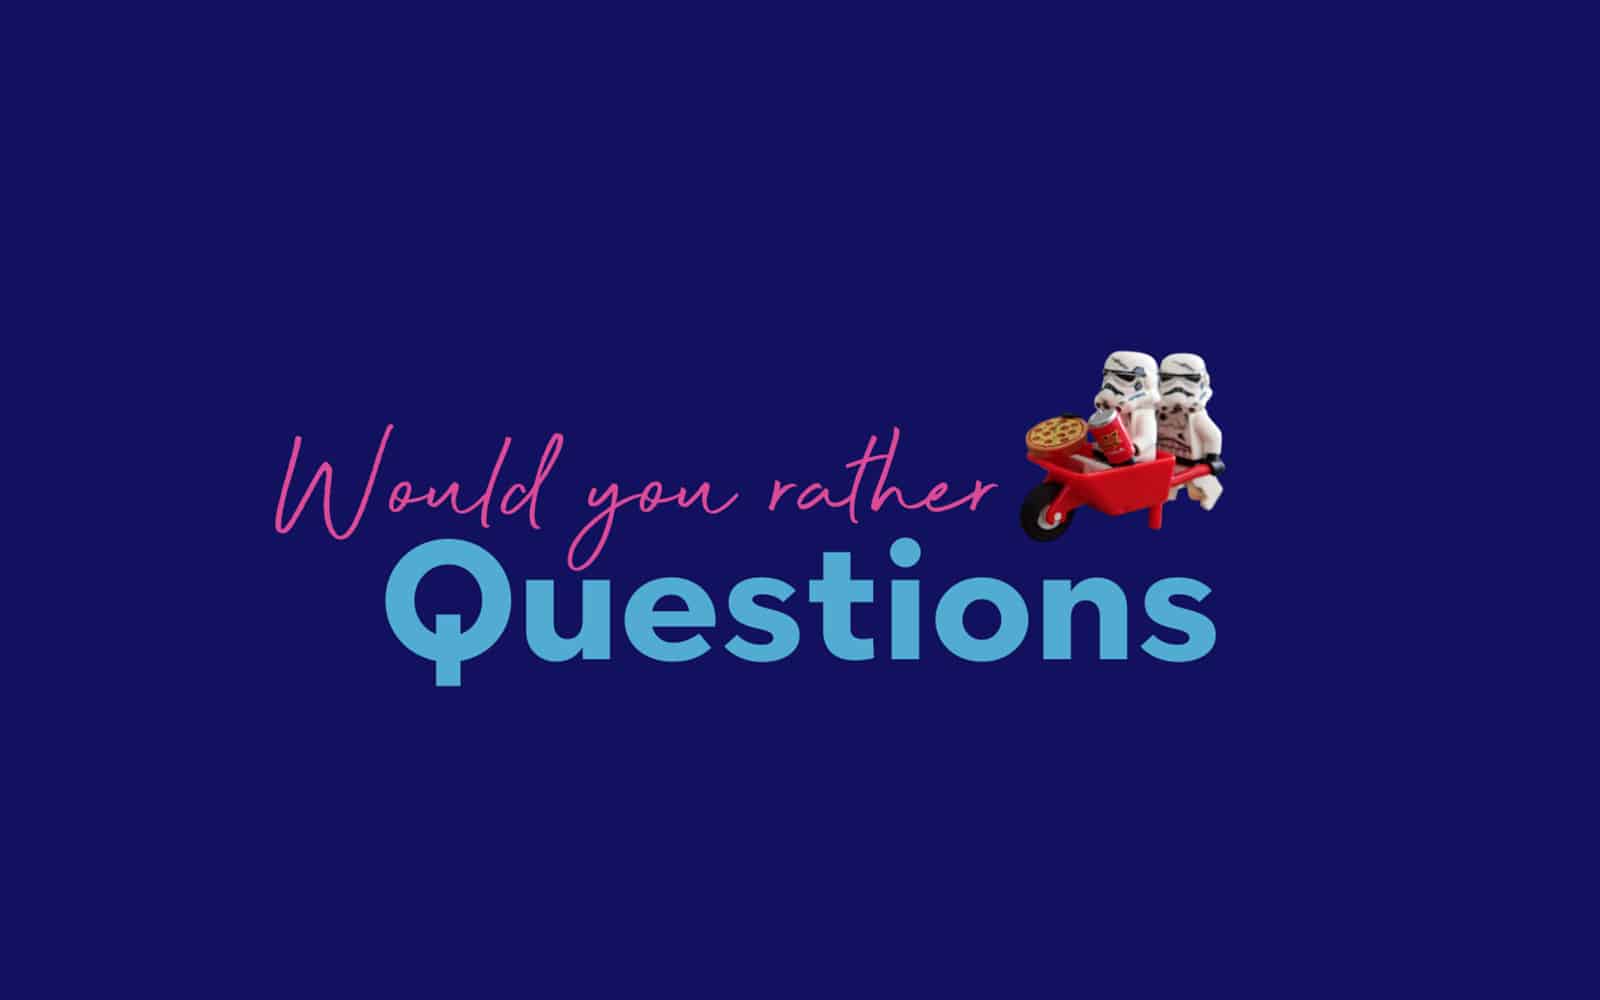 109 funny would you rather questions for adults  Funny would you rather, Would  you rather questions, Fun questions to ask